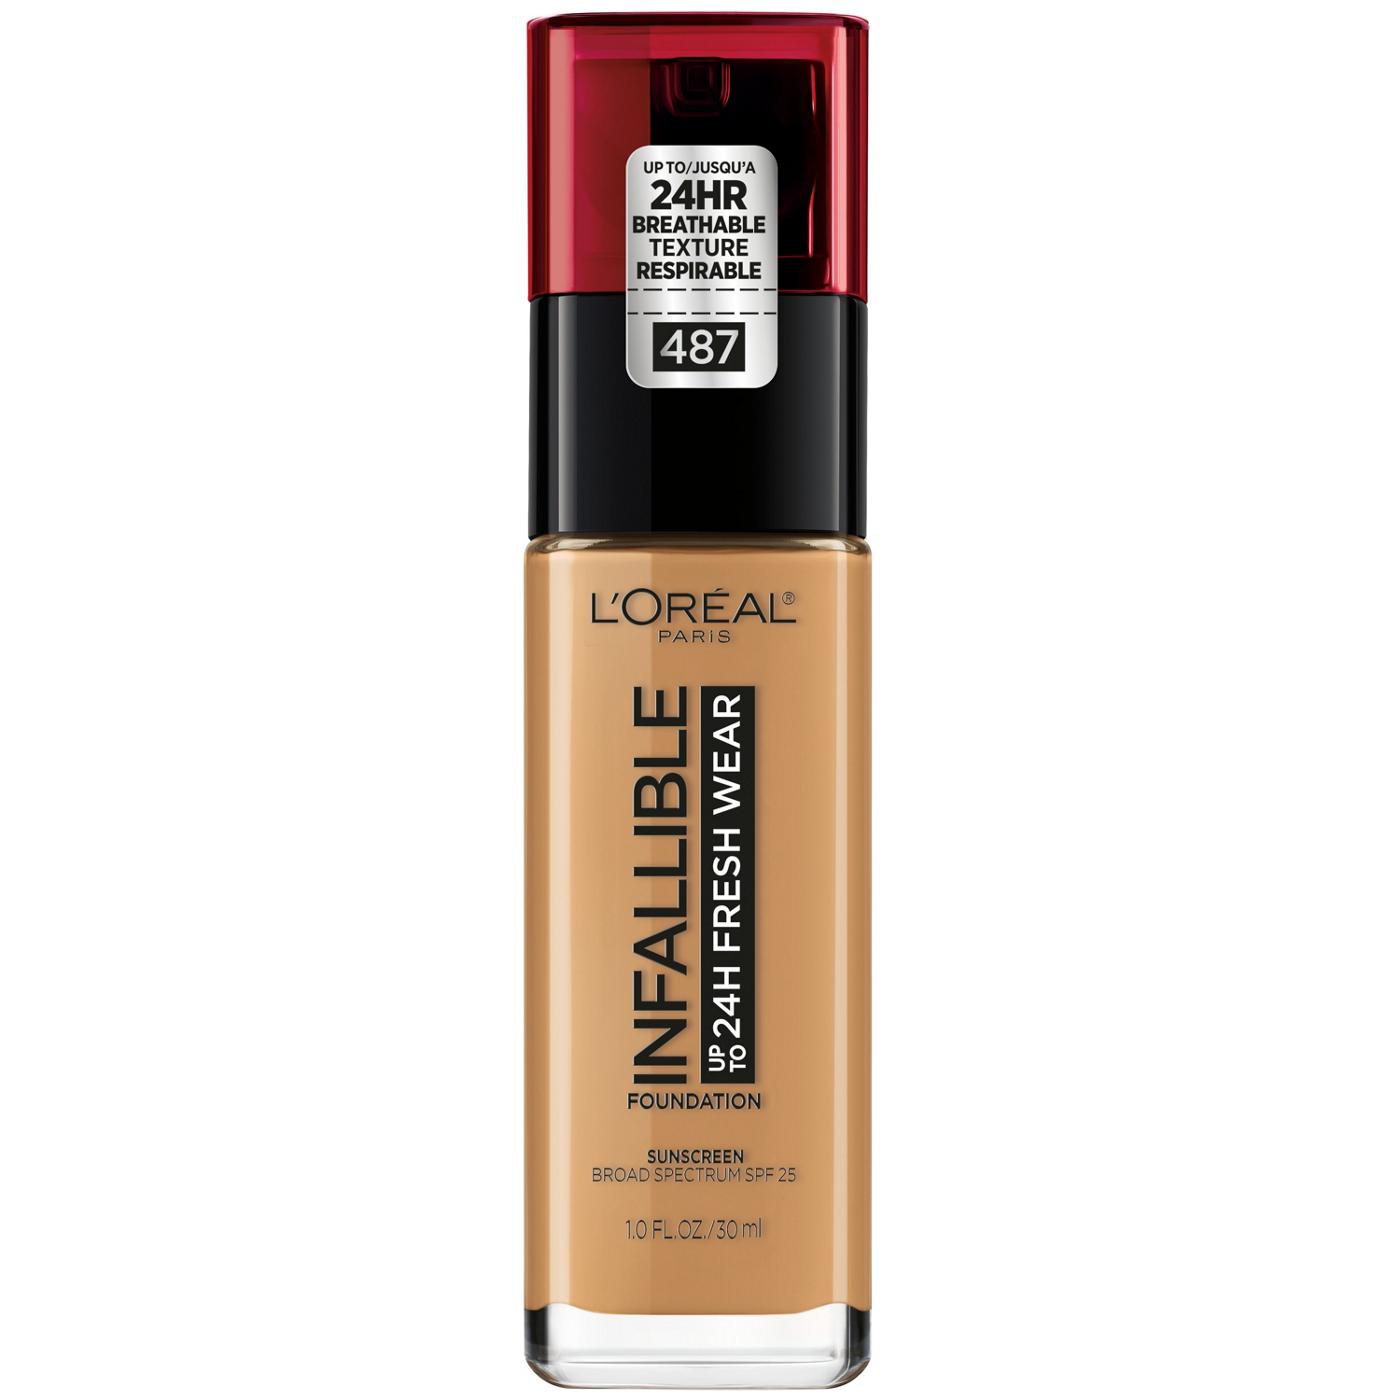 L'Oréal Paris Infallible Up to 24 Hour Fresh Wear Foundation - Lightweight Warm Almond; image 1 of 8